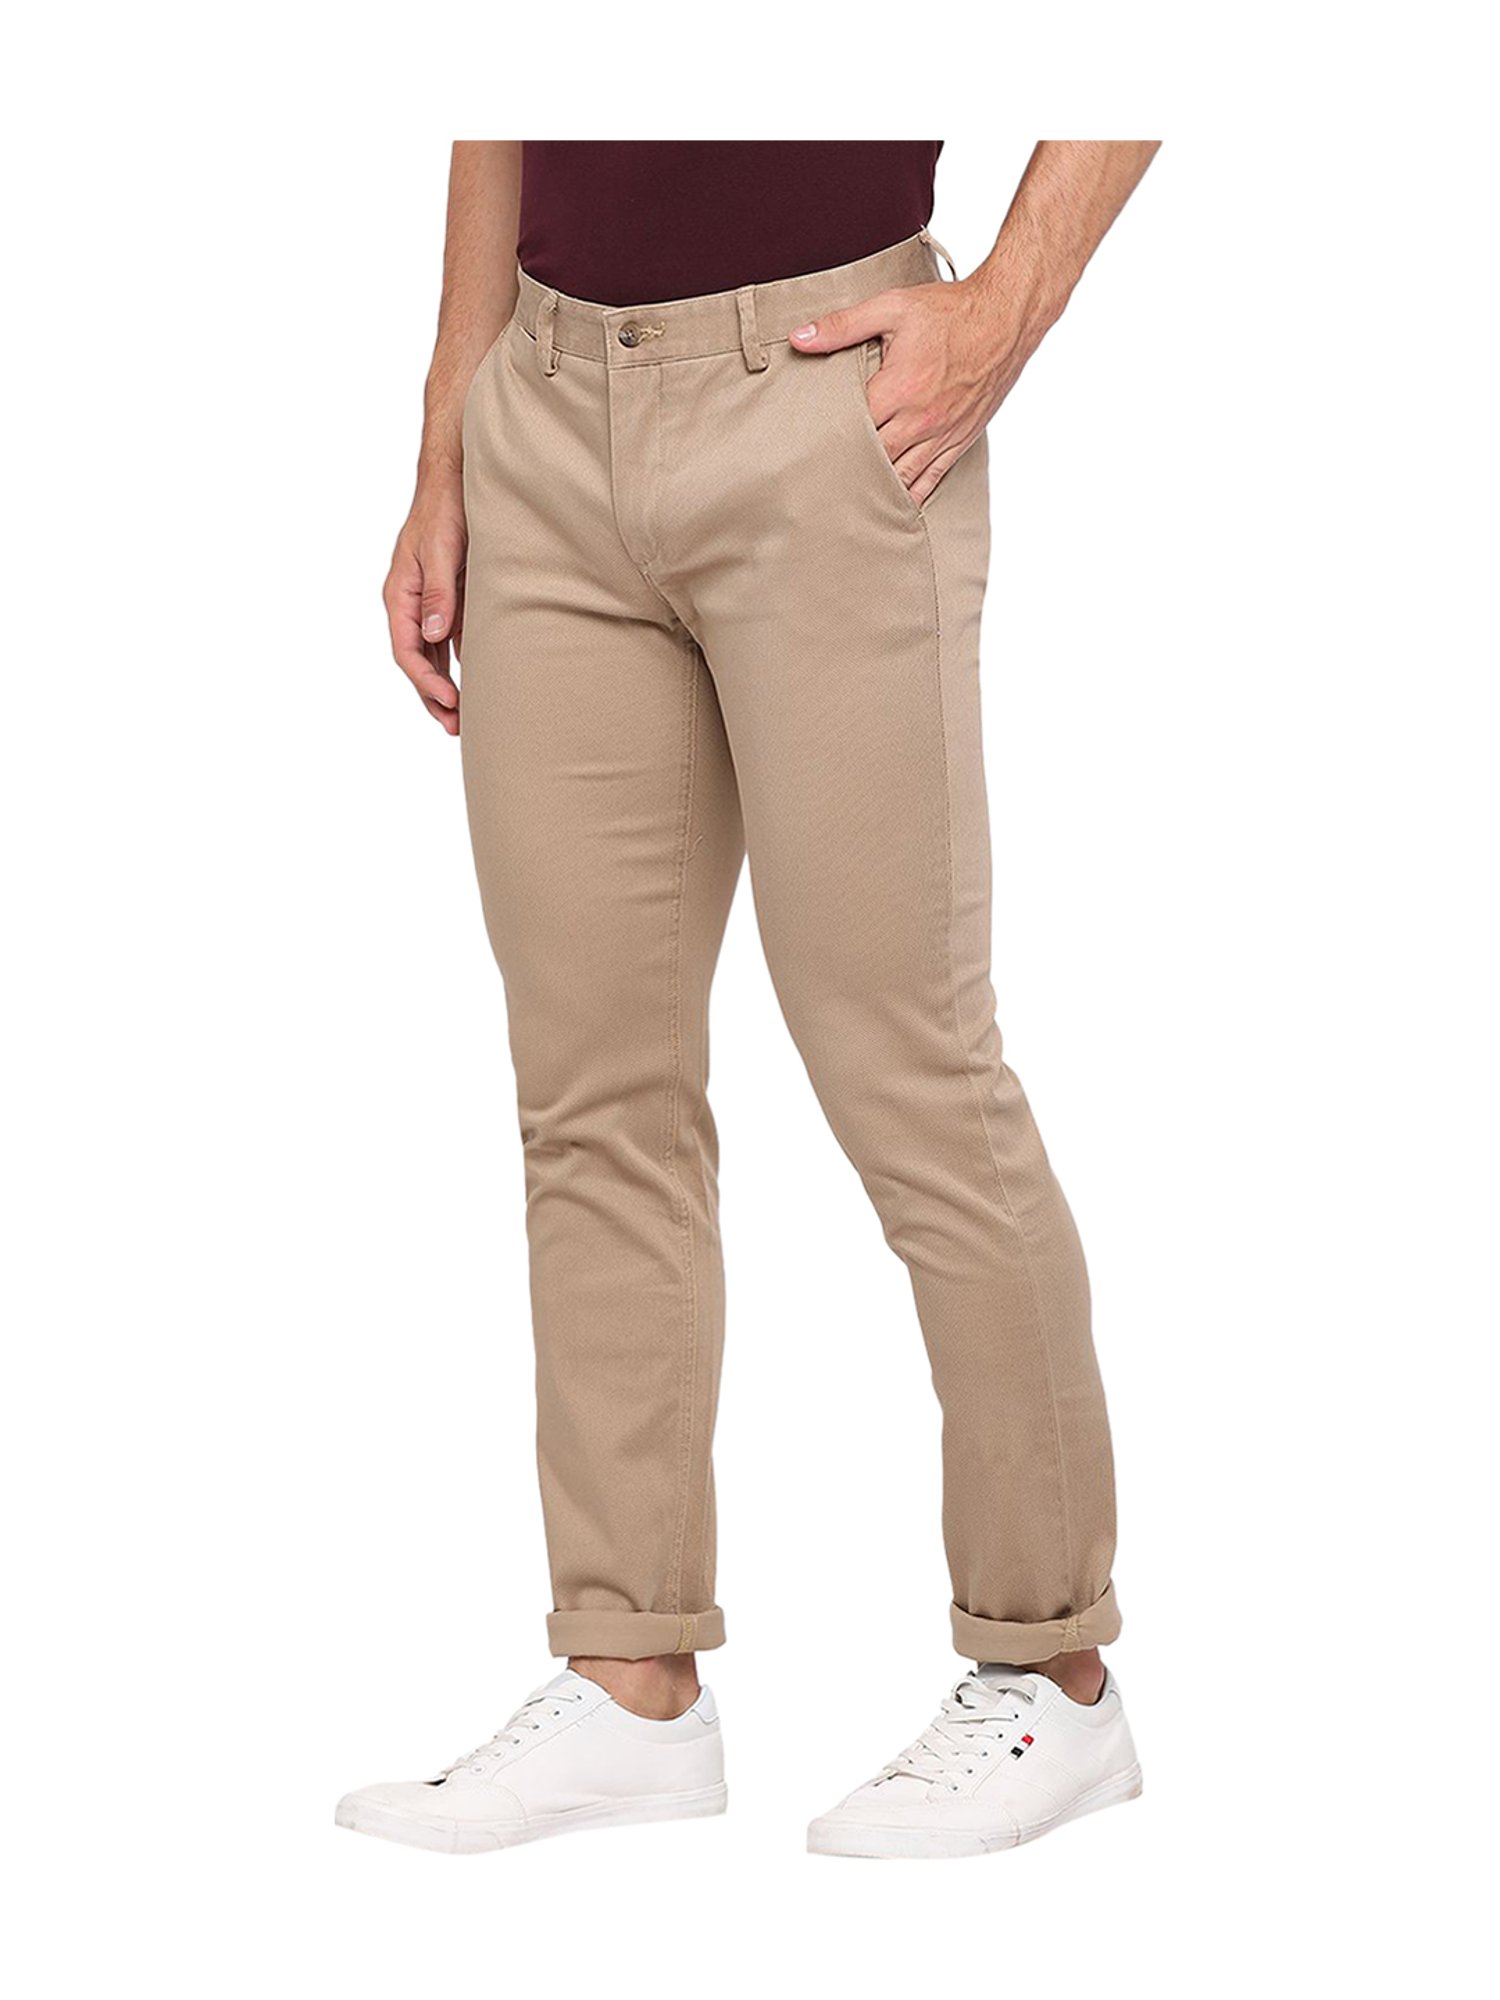 Buy Greenfibre Mens Casual Super Slim Fit Solid Casual Trouser Cotton  Lycra  Beige at Amazonin